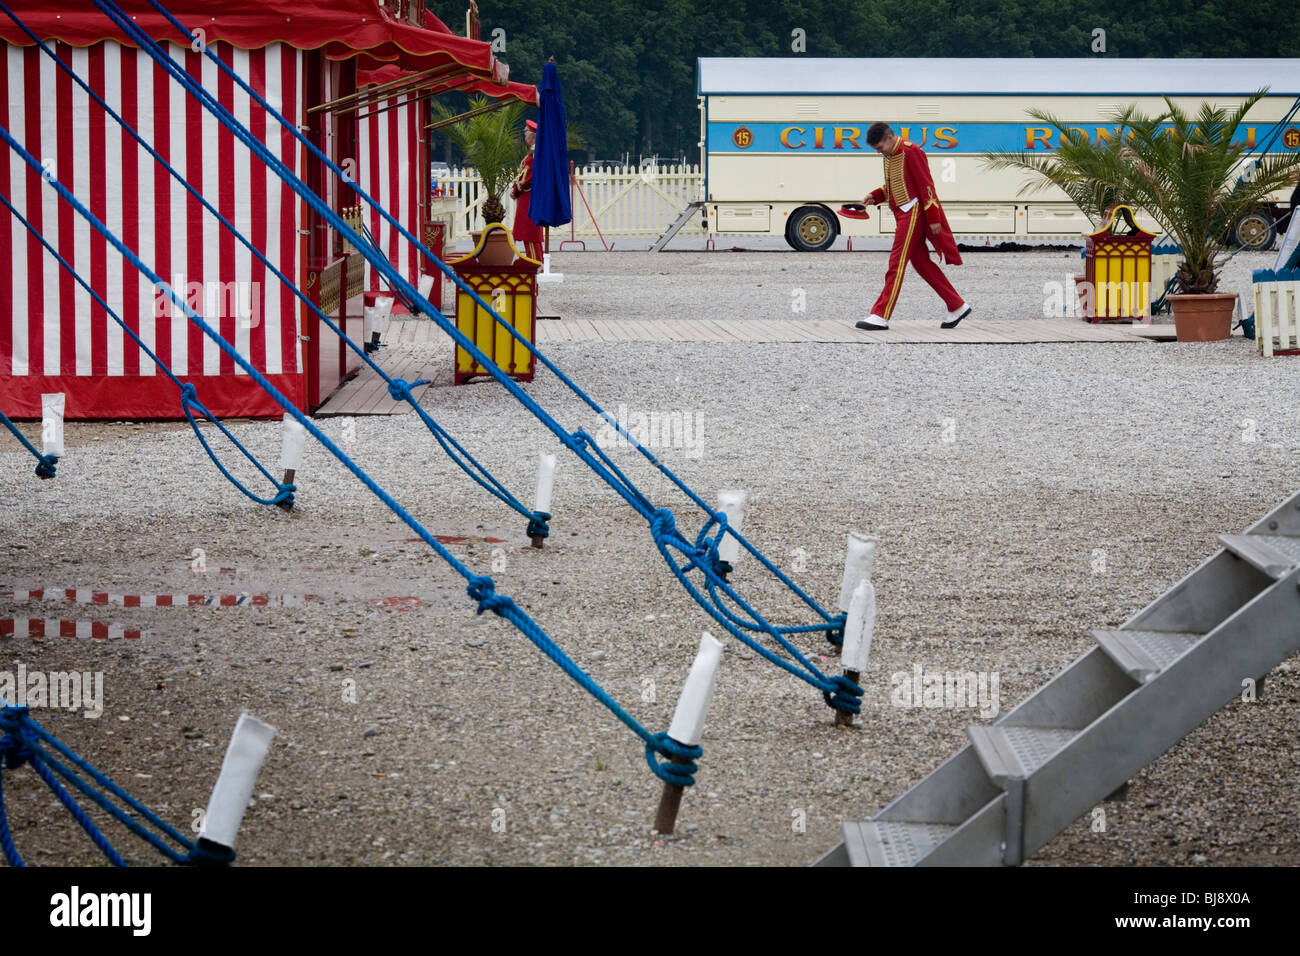 An Usher walks between tents, with a main tent and pegs in front Circus Roncalli. Munich, Germany Stock Photo